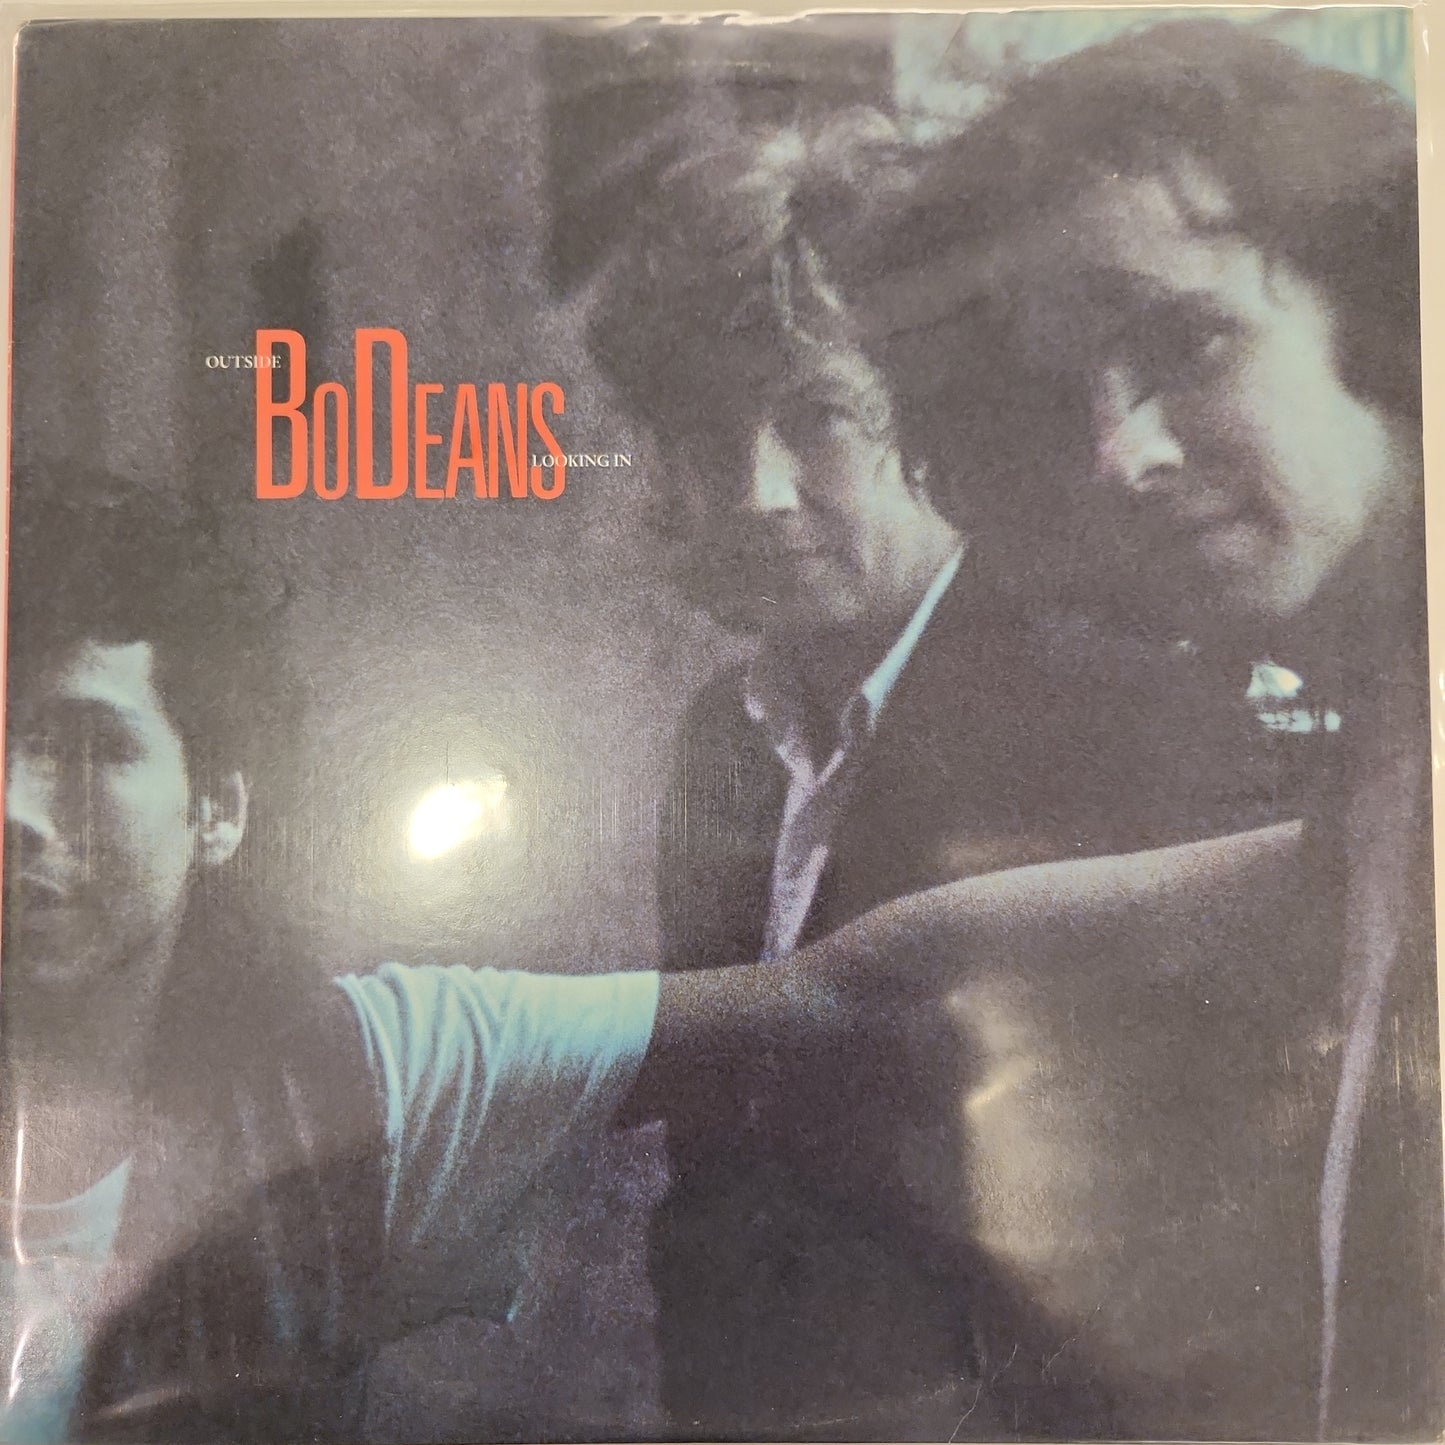 BoDeans - Outside Looking In 2